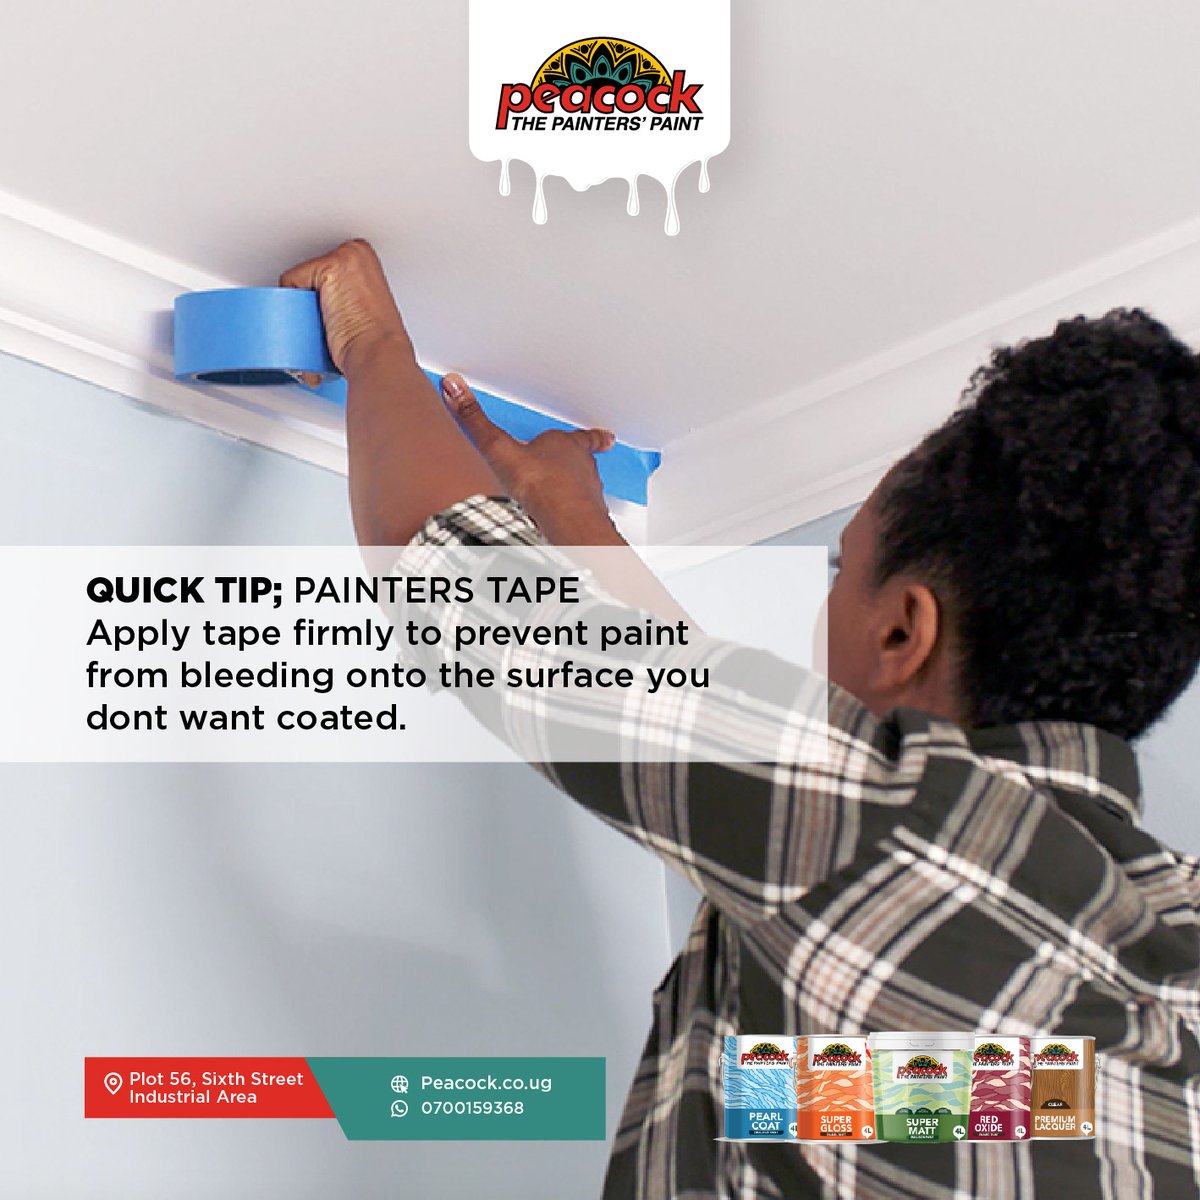 A little tape goes a long way so you can DIY like a pro! Applying tape before you paint to prevent any painting mishaps and maintain crisp and clean lines.

#PeacockPaints🦚 #ThePaintersPaint #DIYPaintingTips🖌️